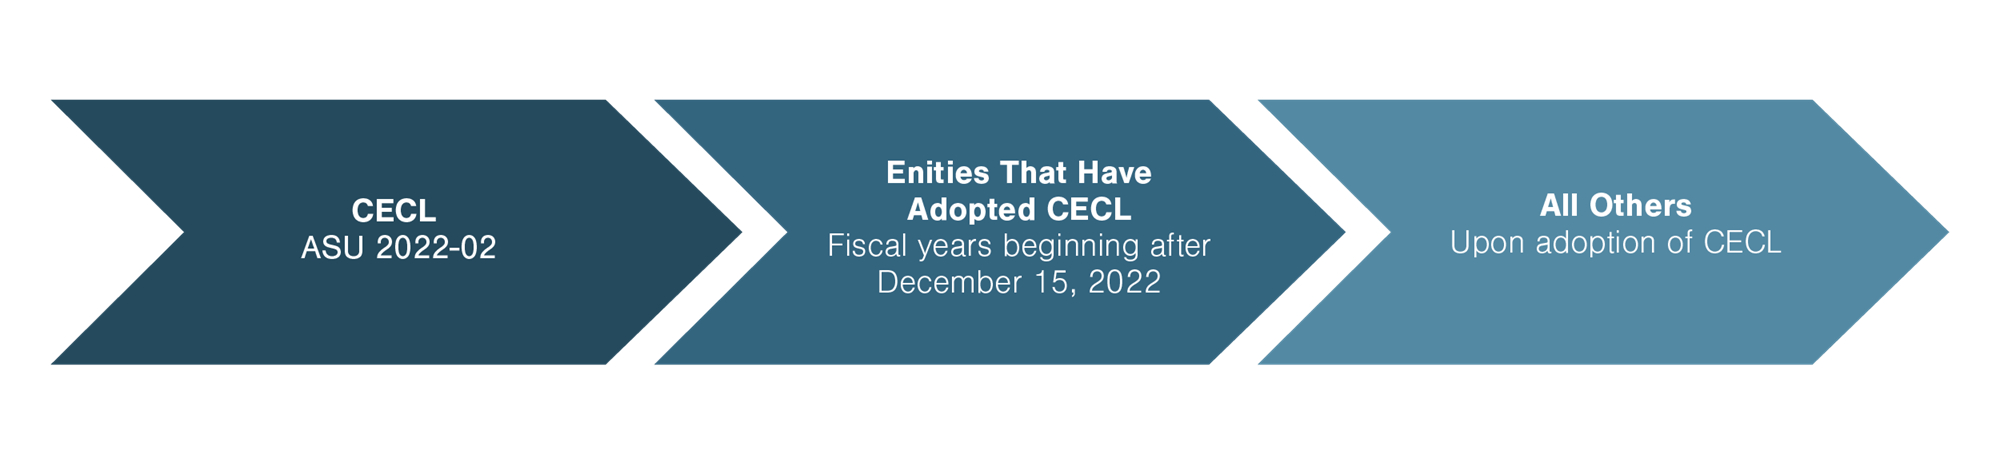 CECL ASU 2022-02 > Entities That Have Adopted CECL - Fiscal years beginning after December 15,2022 > All Others - Upon adoption of CECL